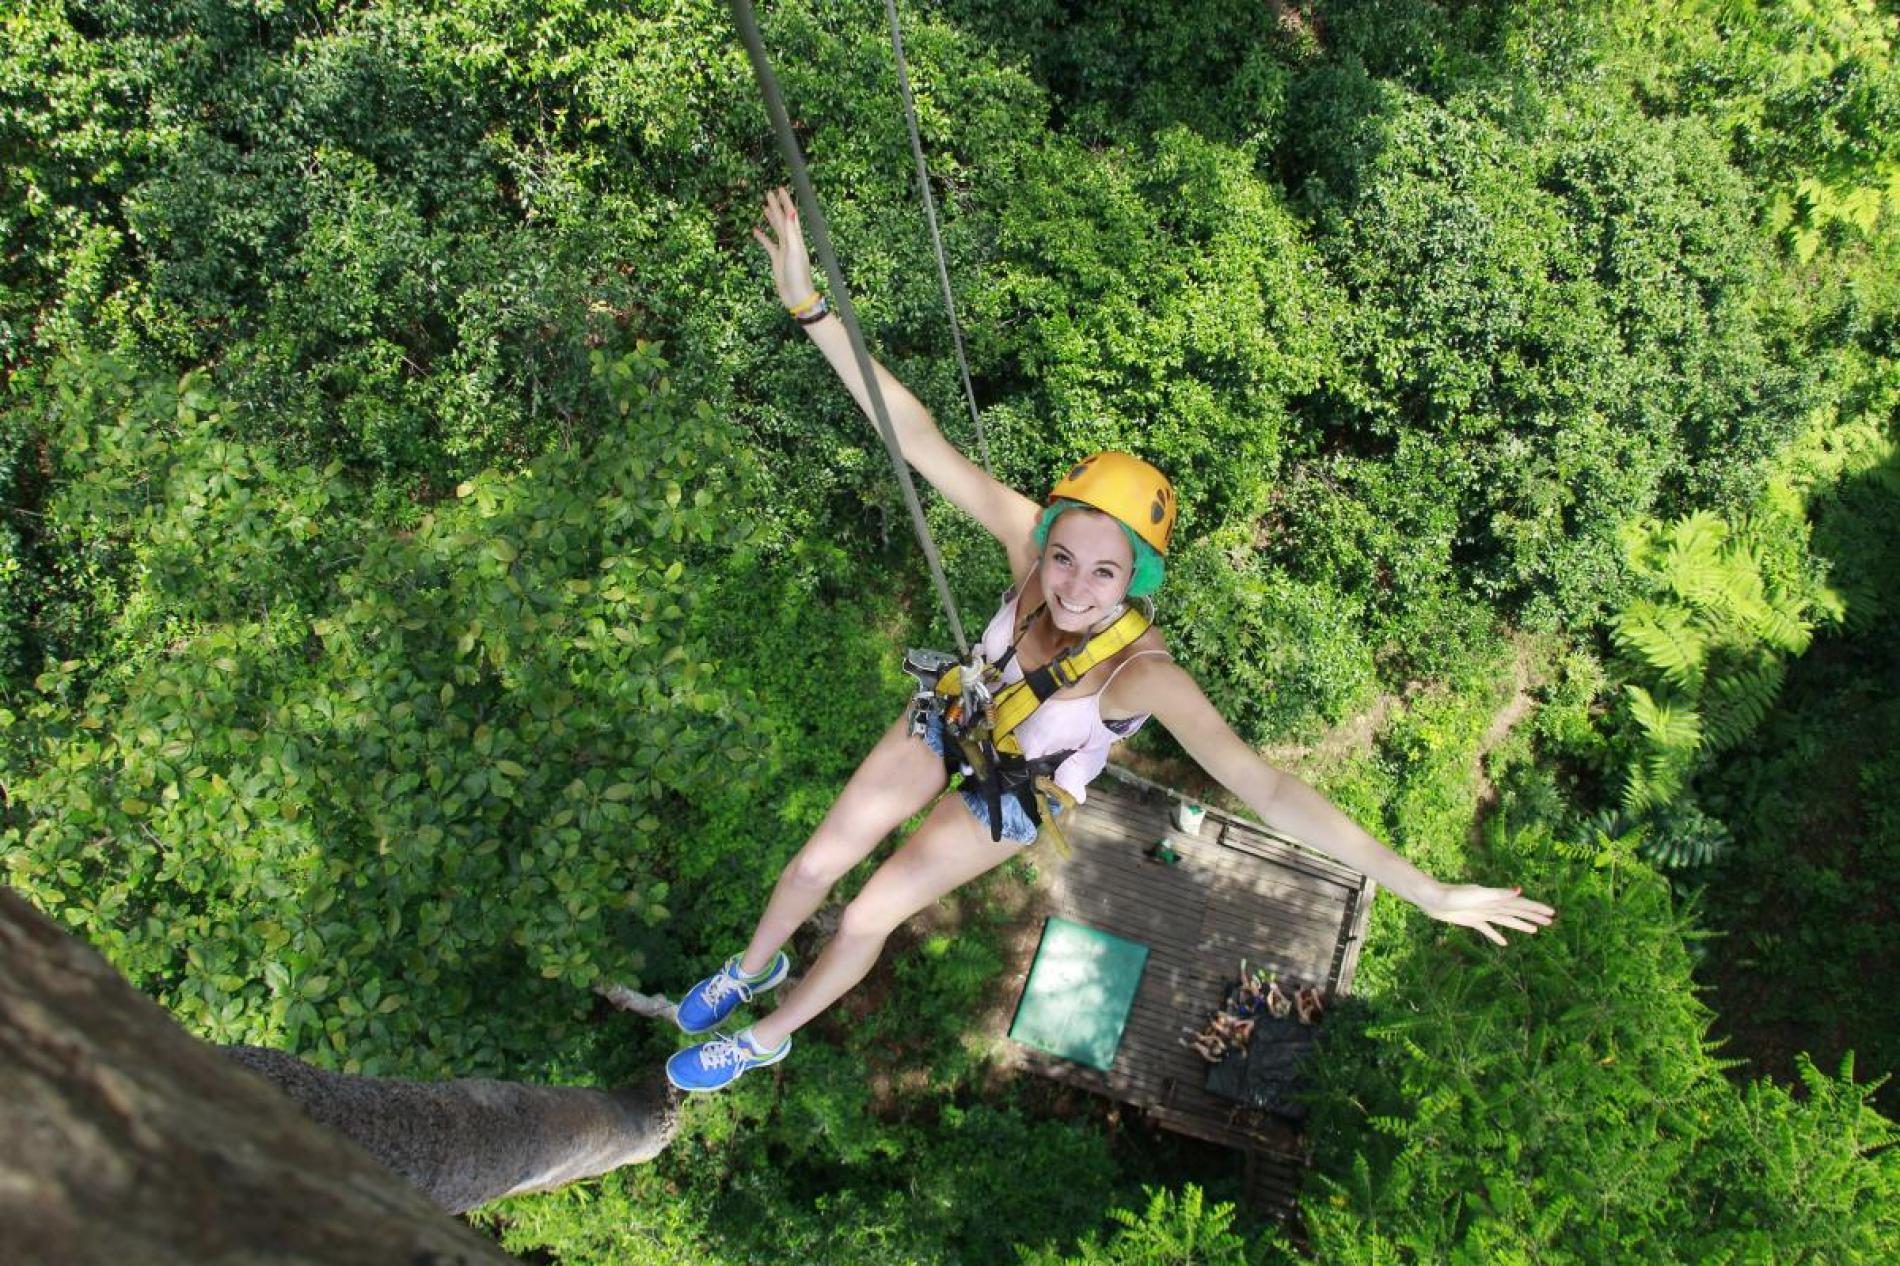 Dragon Flight - Top 3 places to experience zipline in Chiang Mai